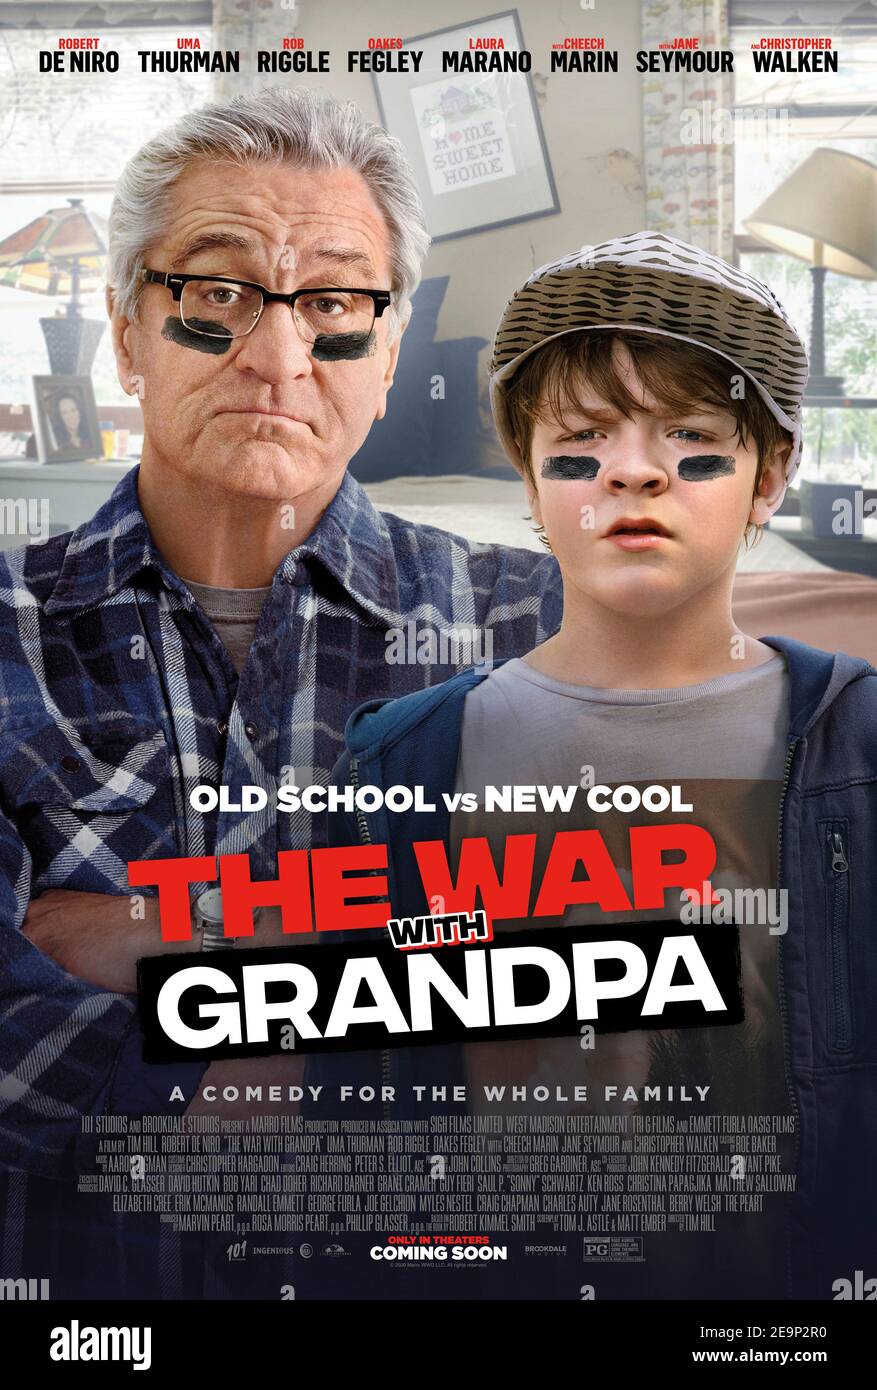 War with Grandpa (2020) directed by Tim Hill and starring Robert De Niro, Uma Thurman and Rob Riggle. Upset that he has to share the room he loves with his grandfather, Peter decides to declare war in an attempt to get it back. Stock Photo